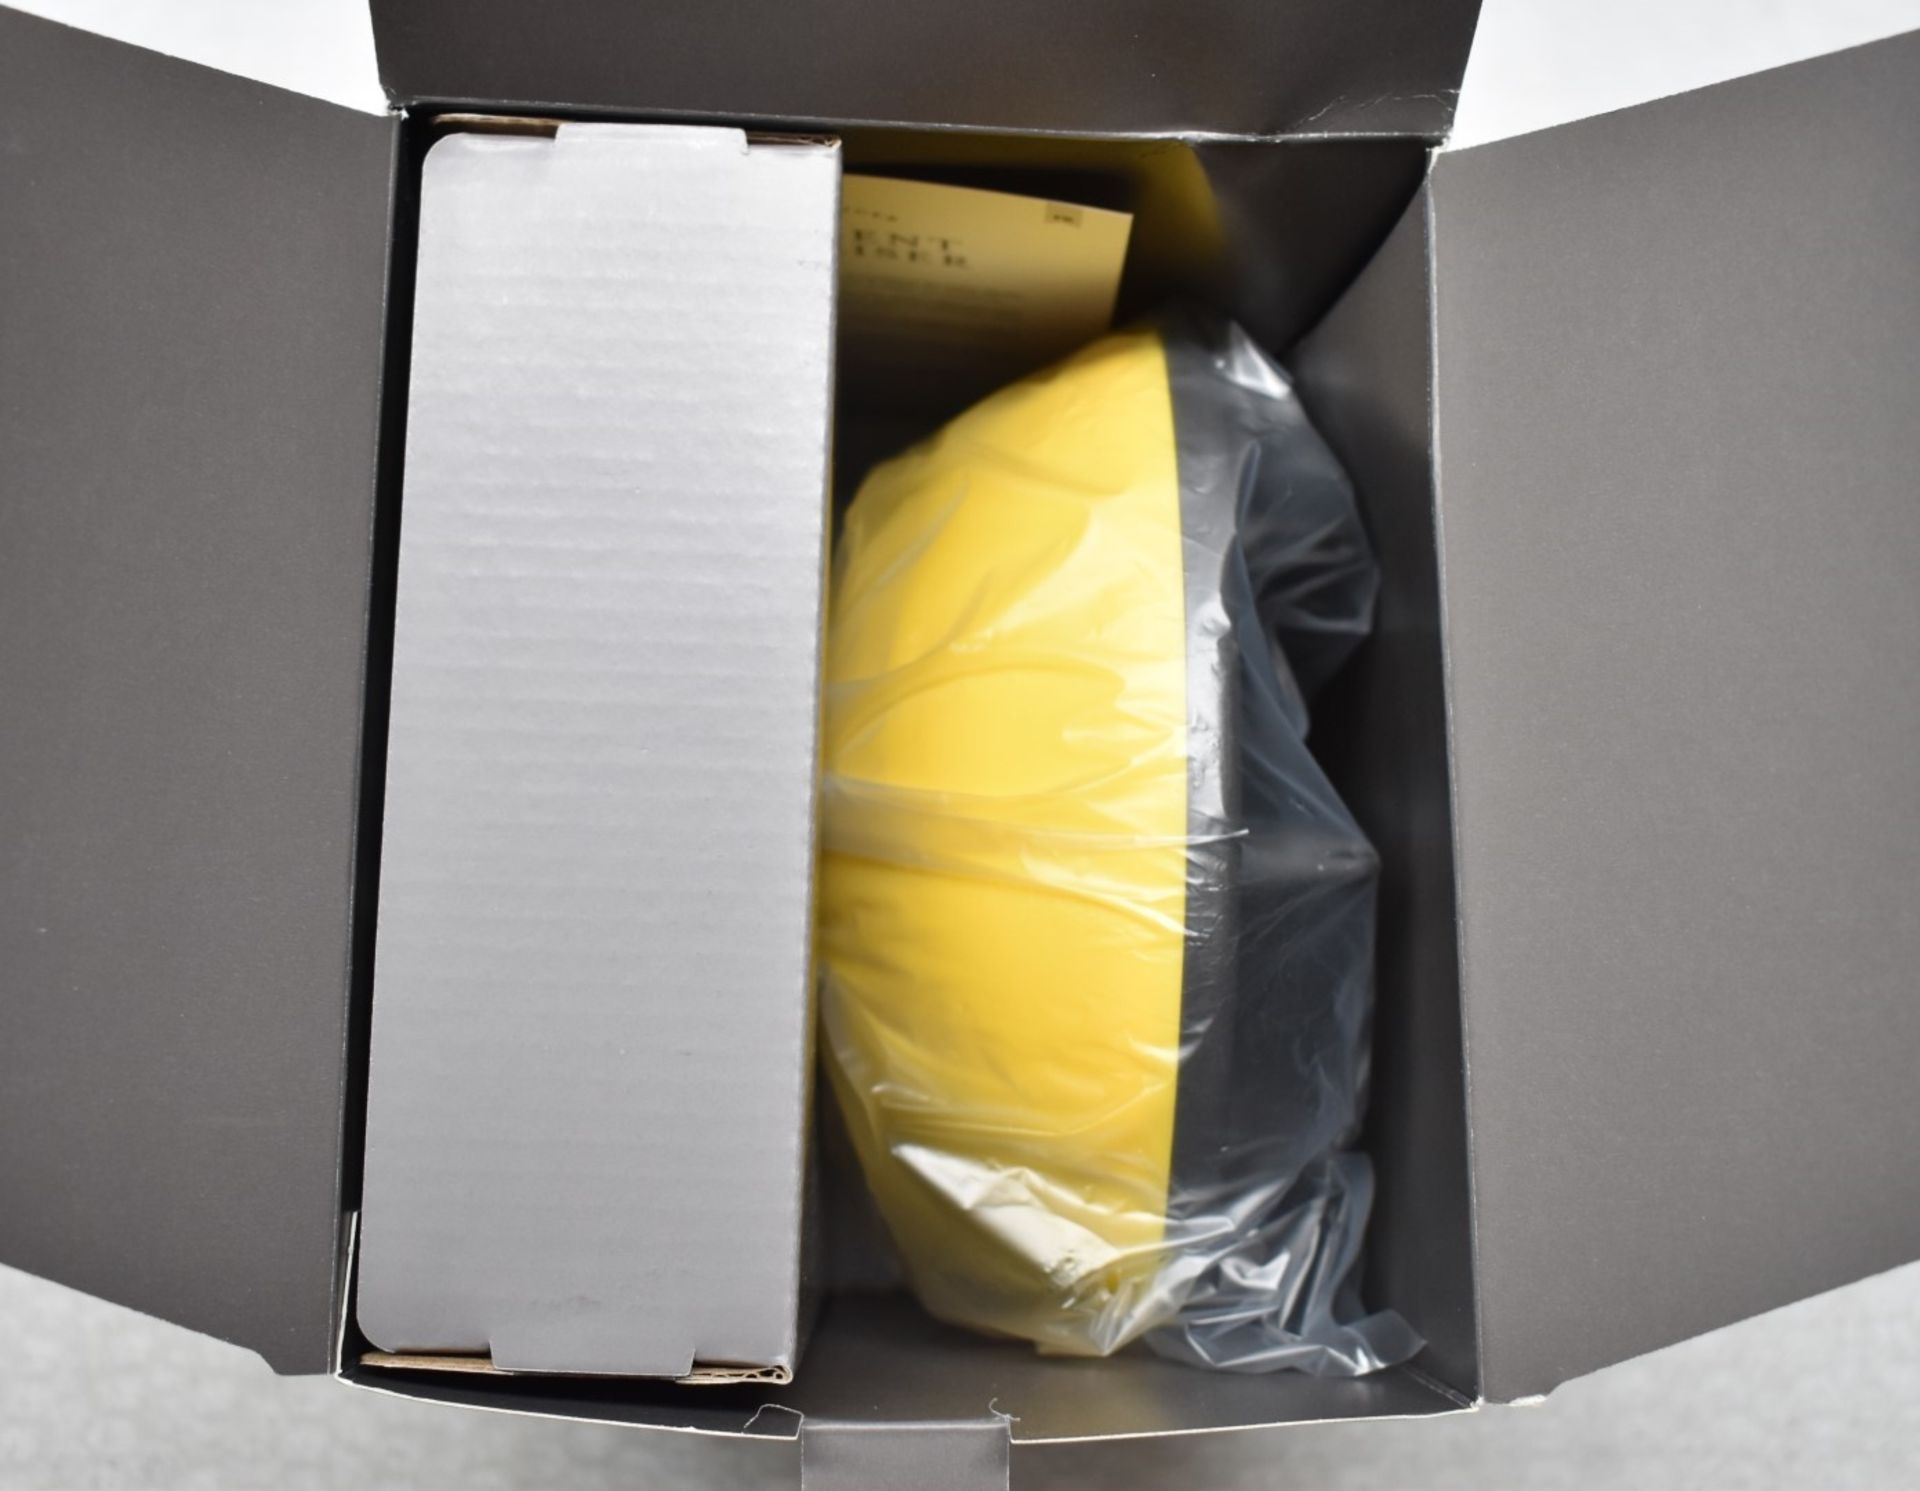 1 x DRYBAR The Bouncer Diffuser - Unused Boxed Stock - Ref: 6832450/HAS2246/WH2-C7/02-23-2 - CL987 - - Image 3 of 9